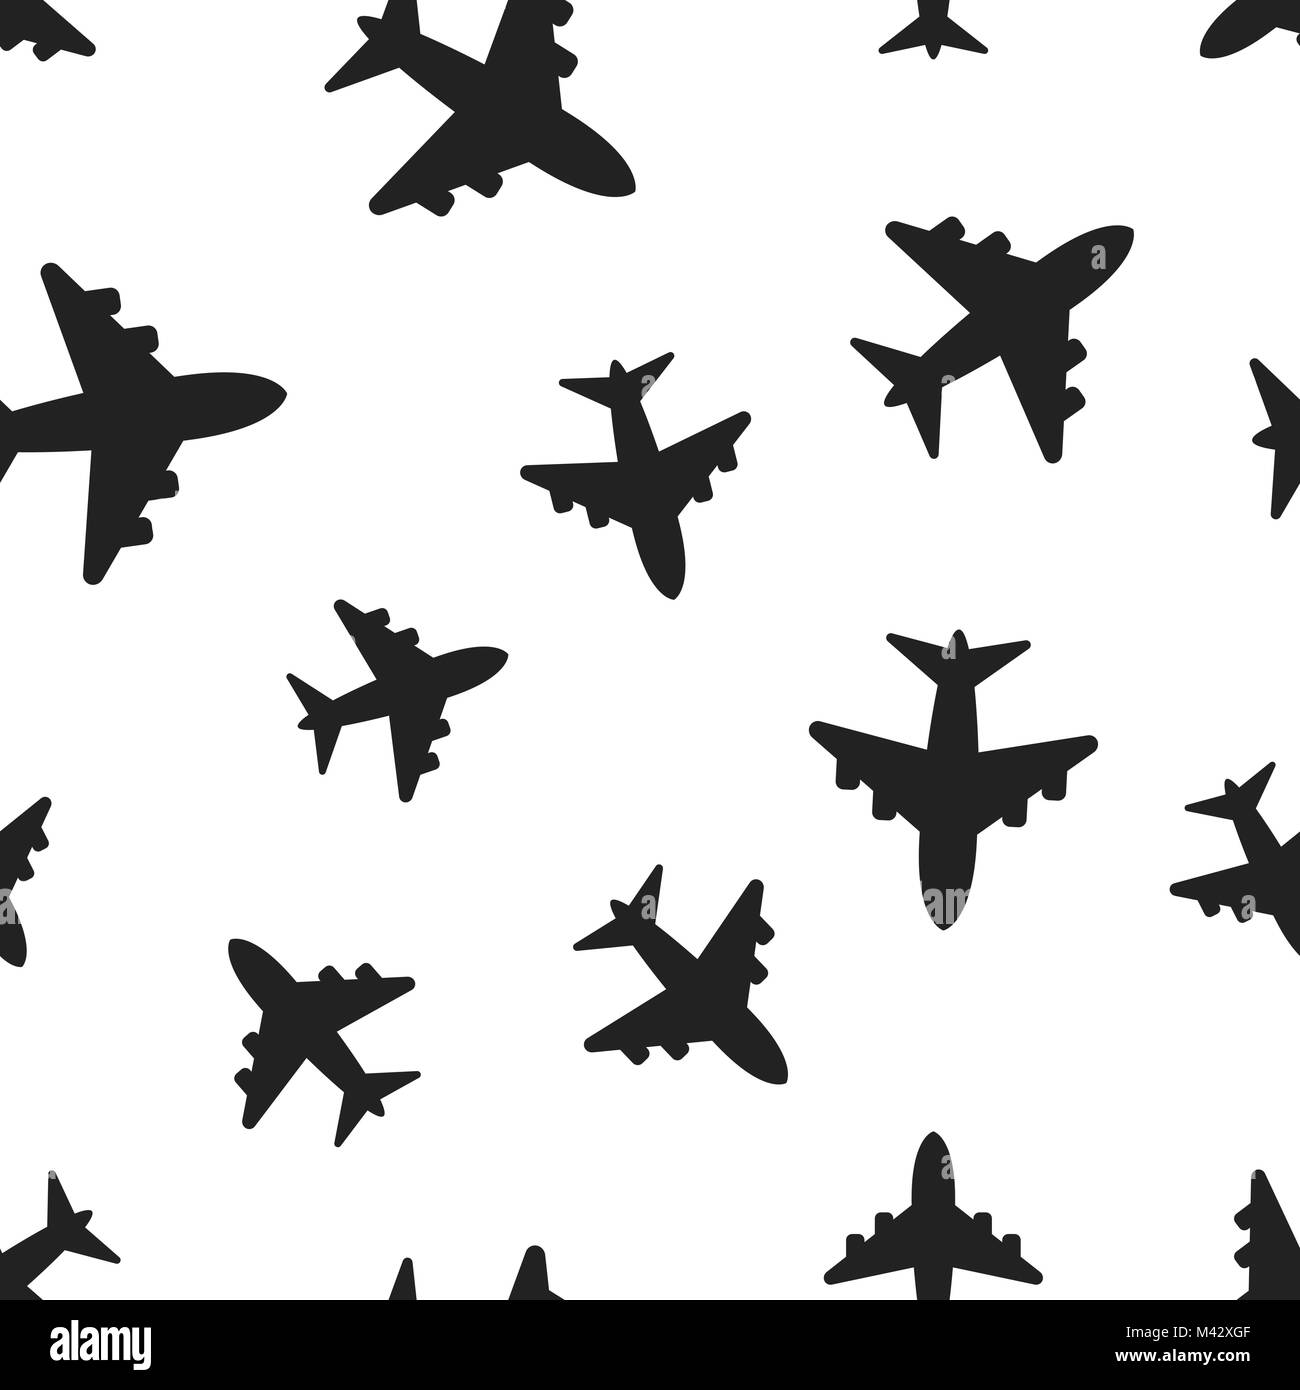 Airplane seamless pattern background. Business concept vector illustration. Airport plane symbol pattern. Stock Vector